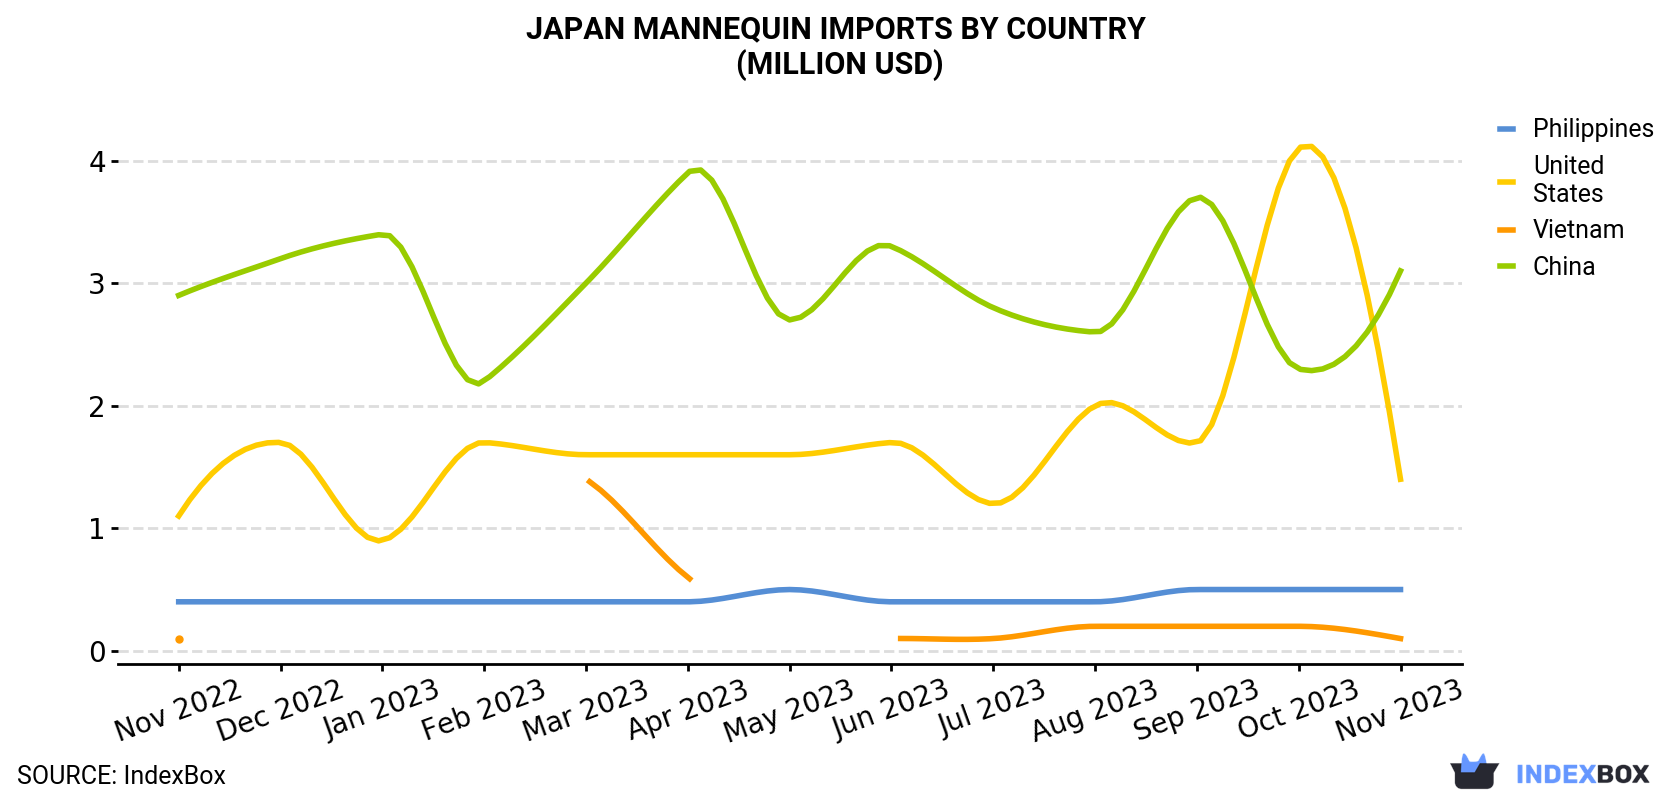 Japan Mannequin Imports By Country (Million USD)